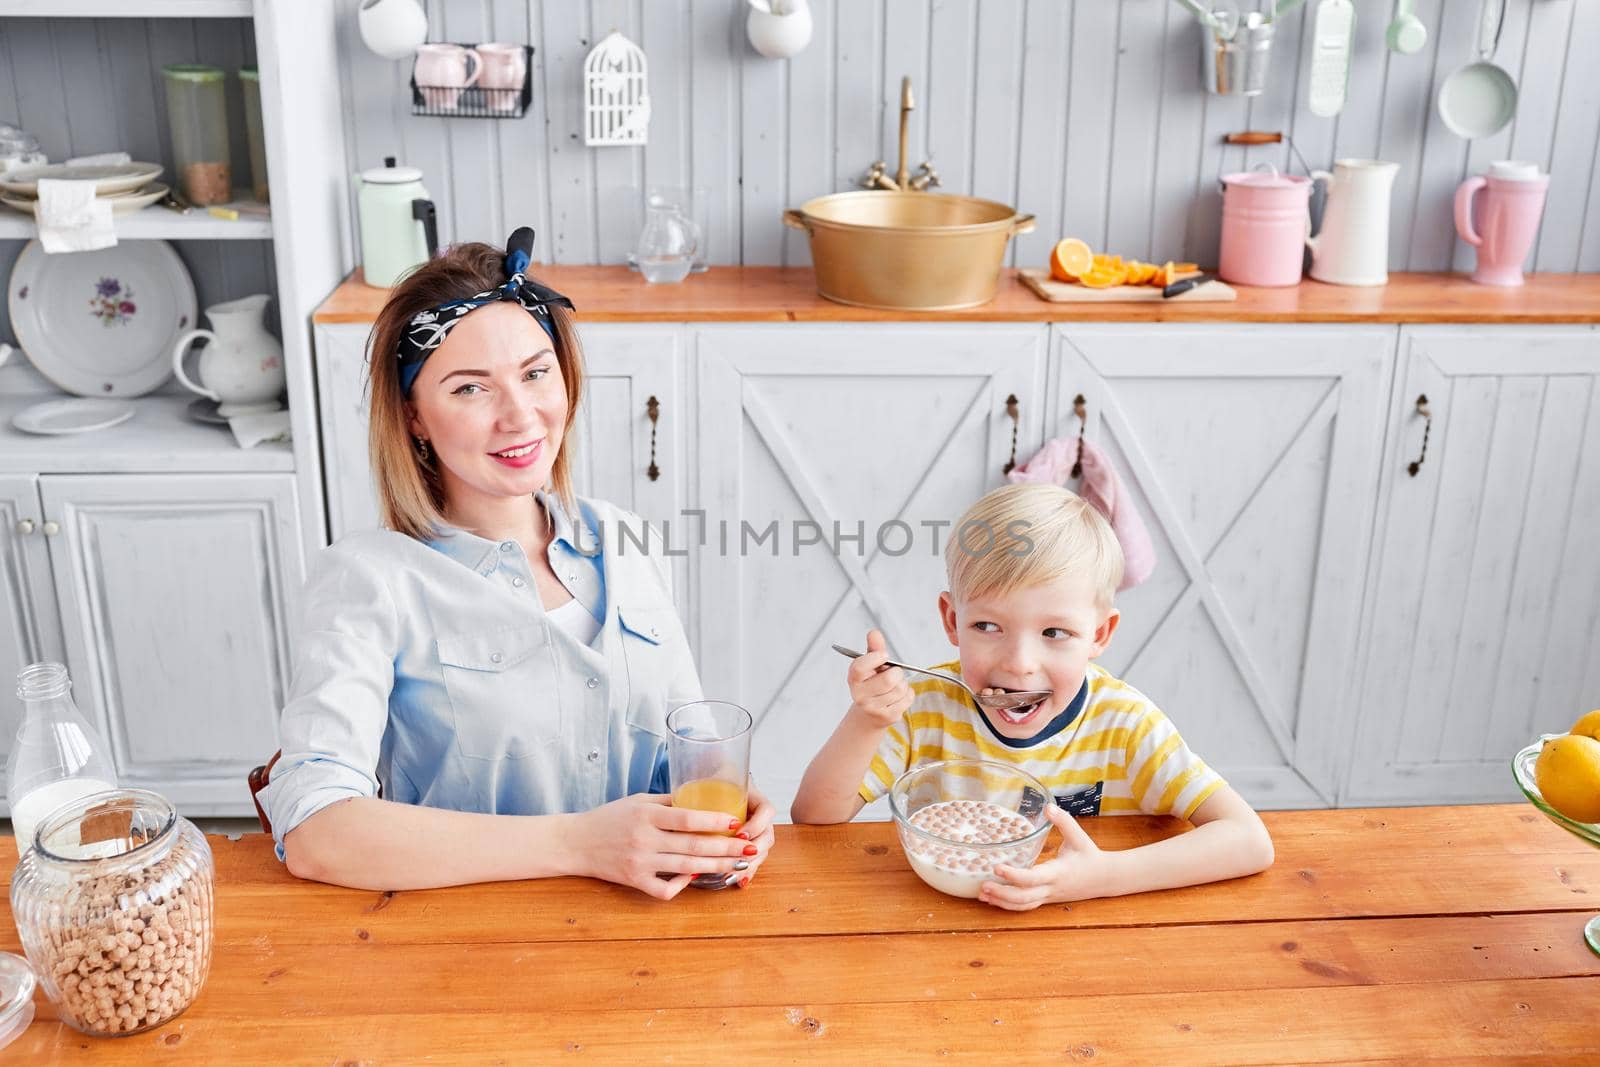 The boy greedily eats cereal with milk. Mother and son are smiling while having a breakfast in kitchen. Bright morning in the kitchen. Healthy Breakfast cereals and fresh fruit. by Malkovkosta